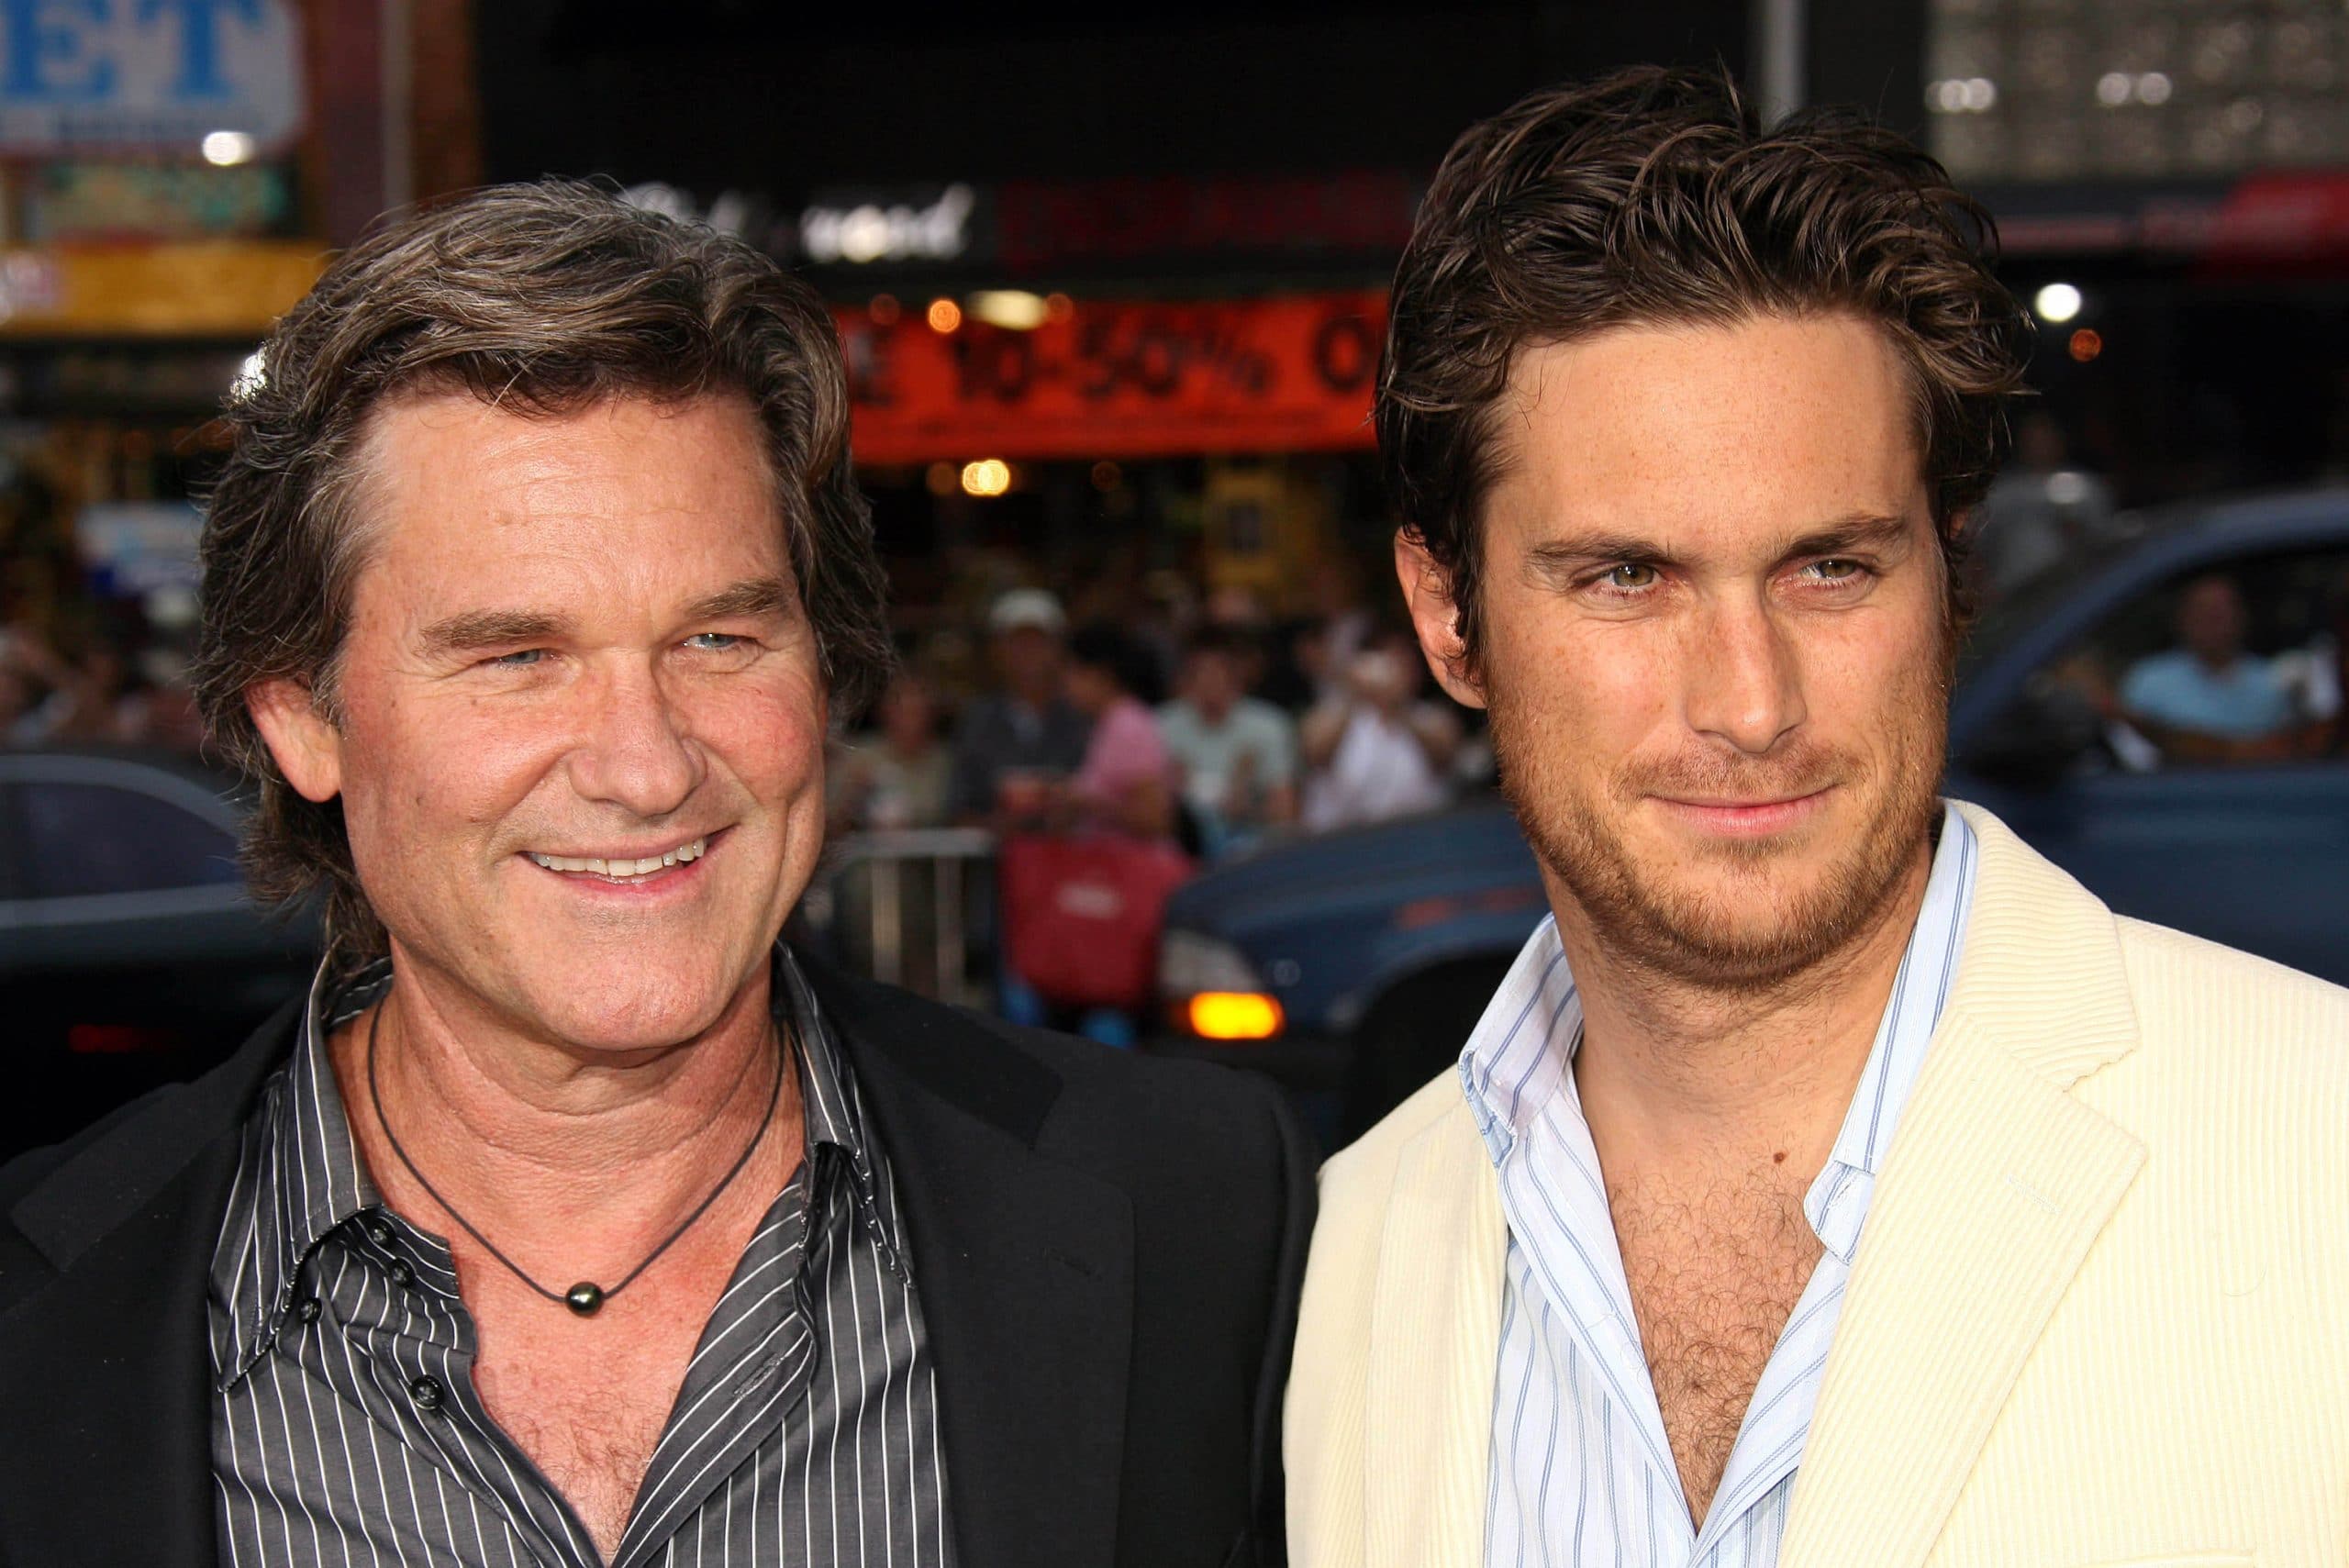 Kurt Russell and Oliver Hudson